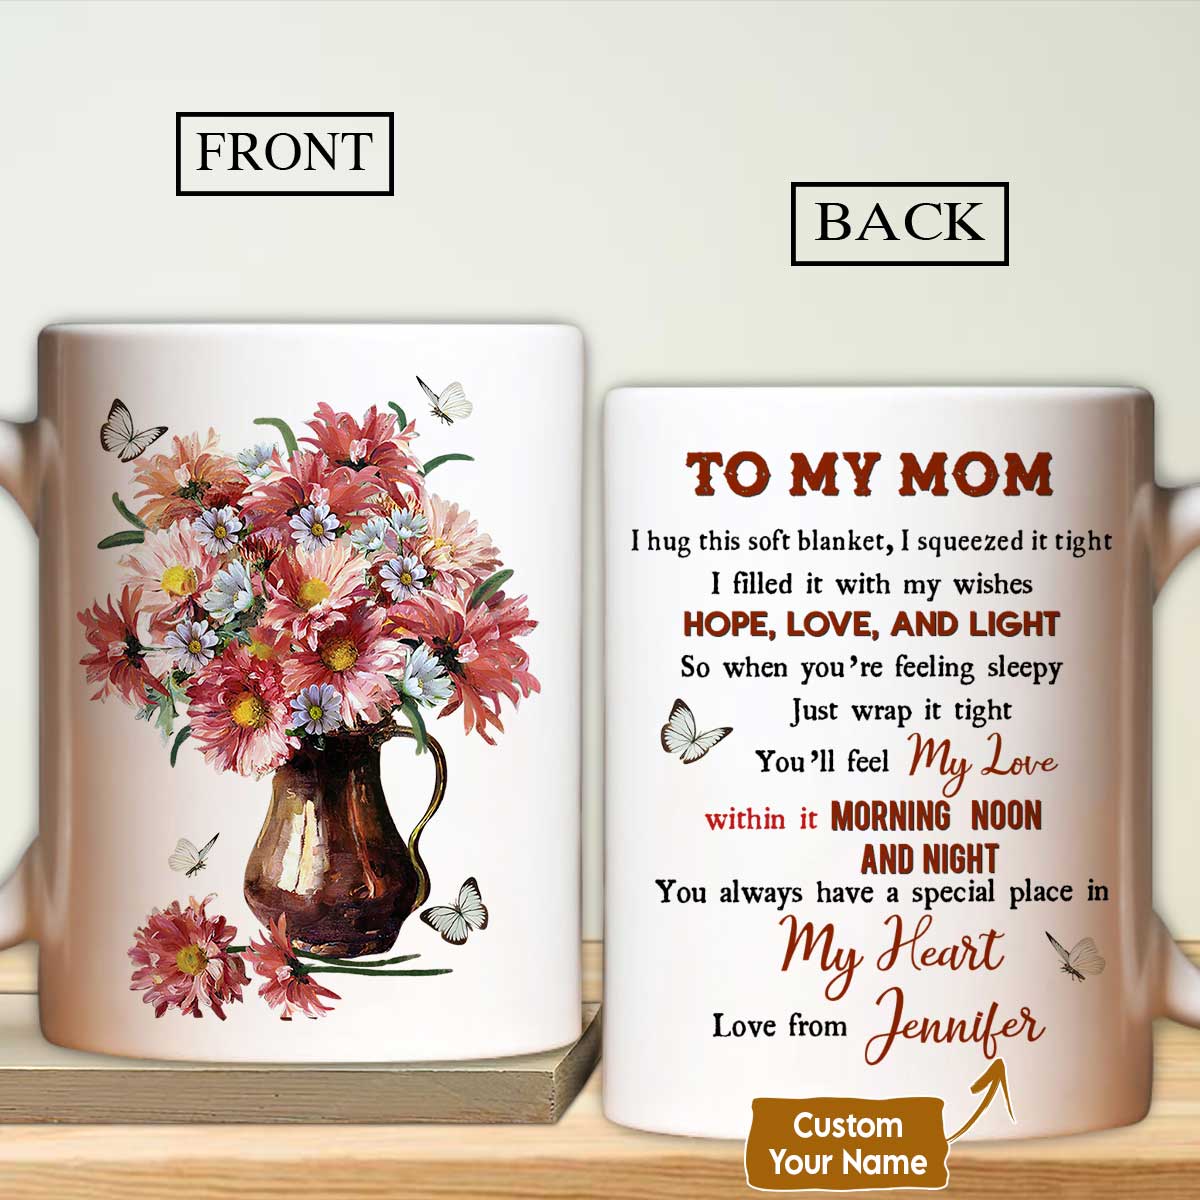 Gift For Mom Personalized Mug - Daughter to mom, Flower vase, White butterfly, Colorful daisy Mug - Custom Gift For Mother's Day, Presents for Mom